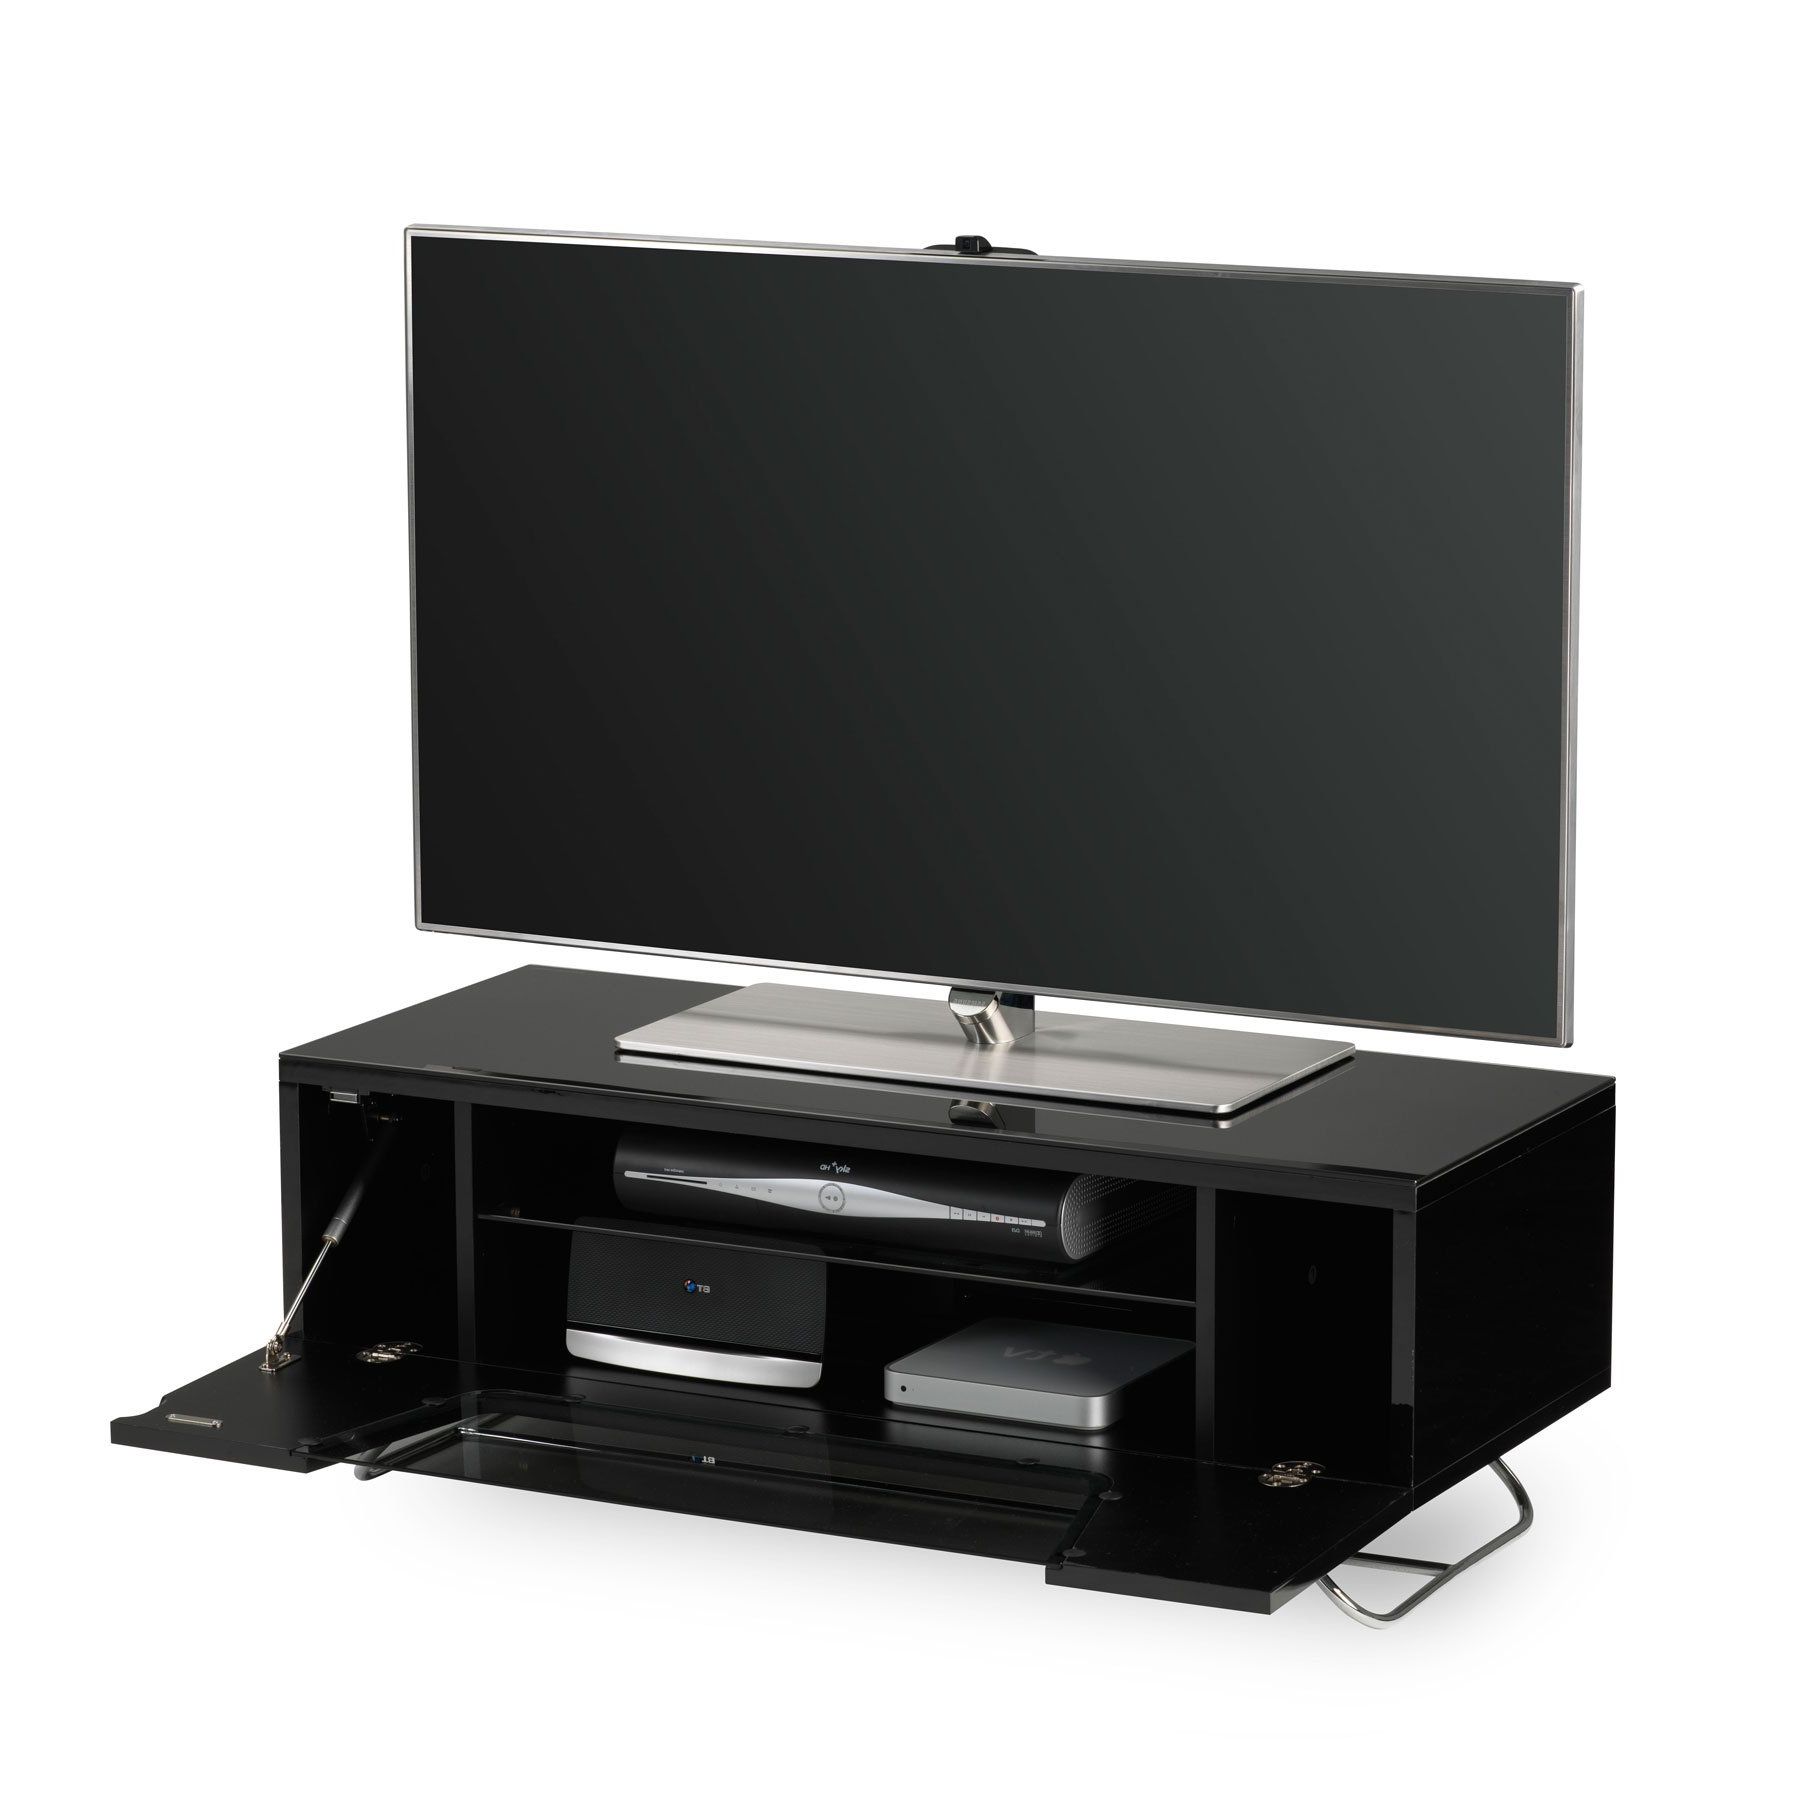 Alphason Chromium 2 100cm Black Tv Stand For Up To 50" Tvs Intended For Caleah Tv Stands For Tvs Up To 50&quot; (Gallery 12 of 20)